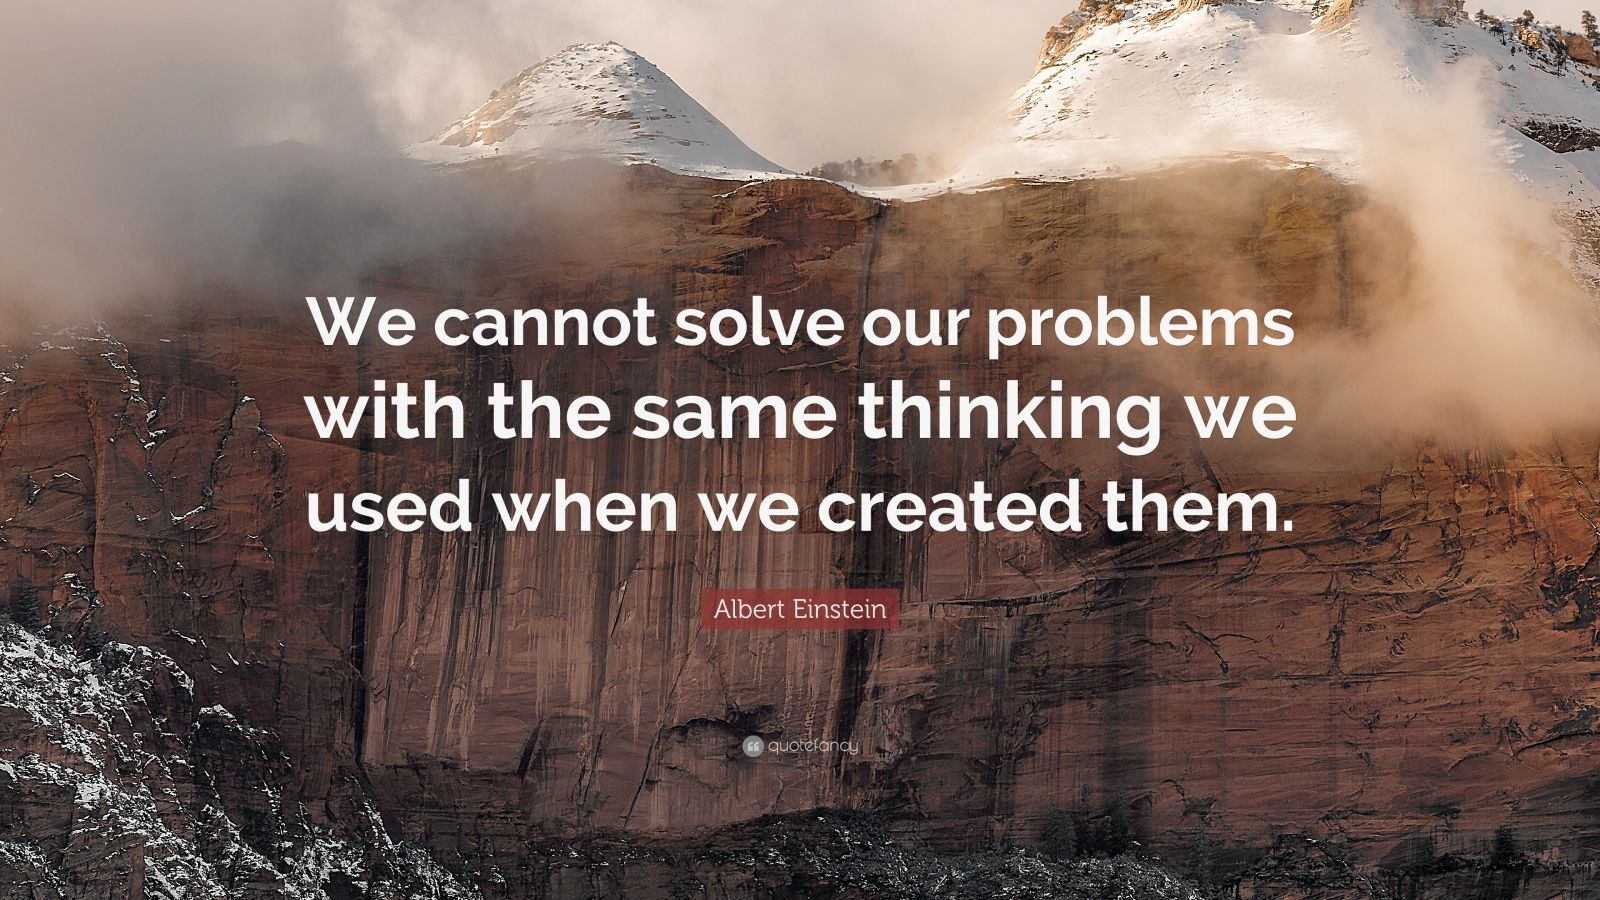 critical thinking and problem solving quotes